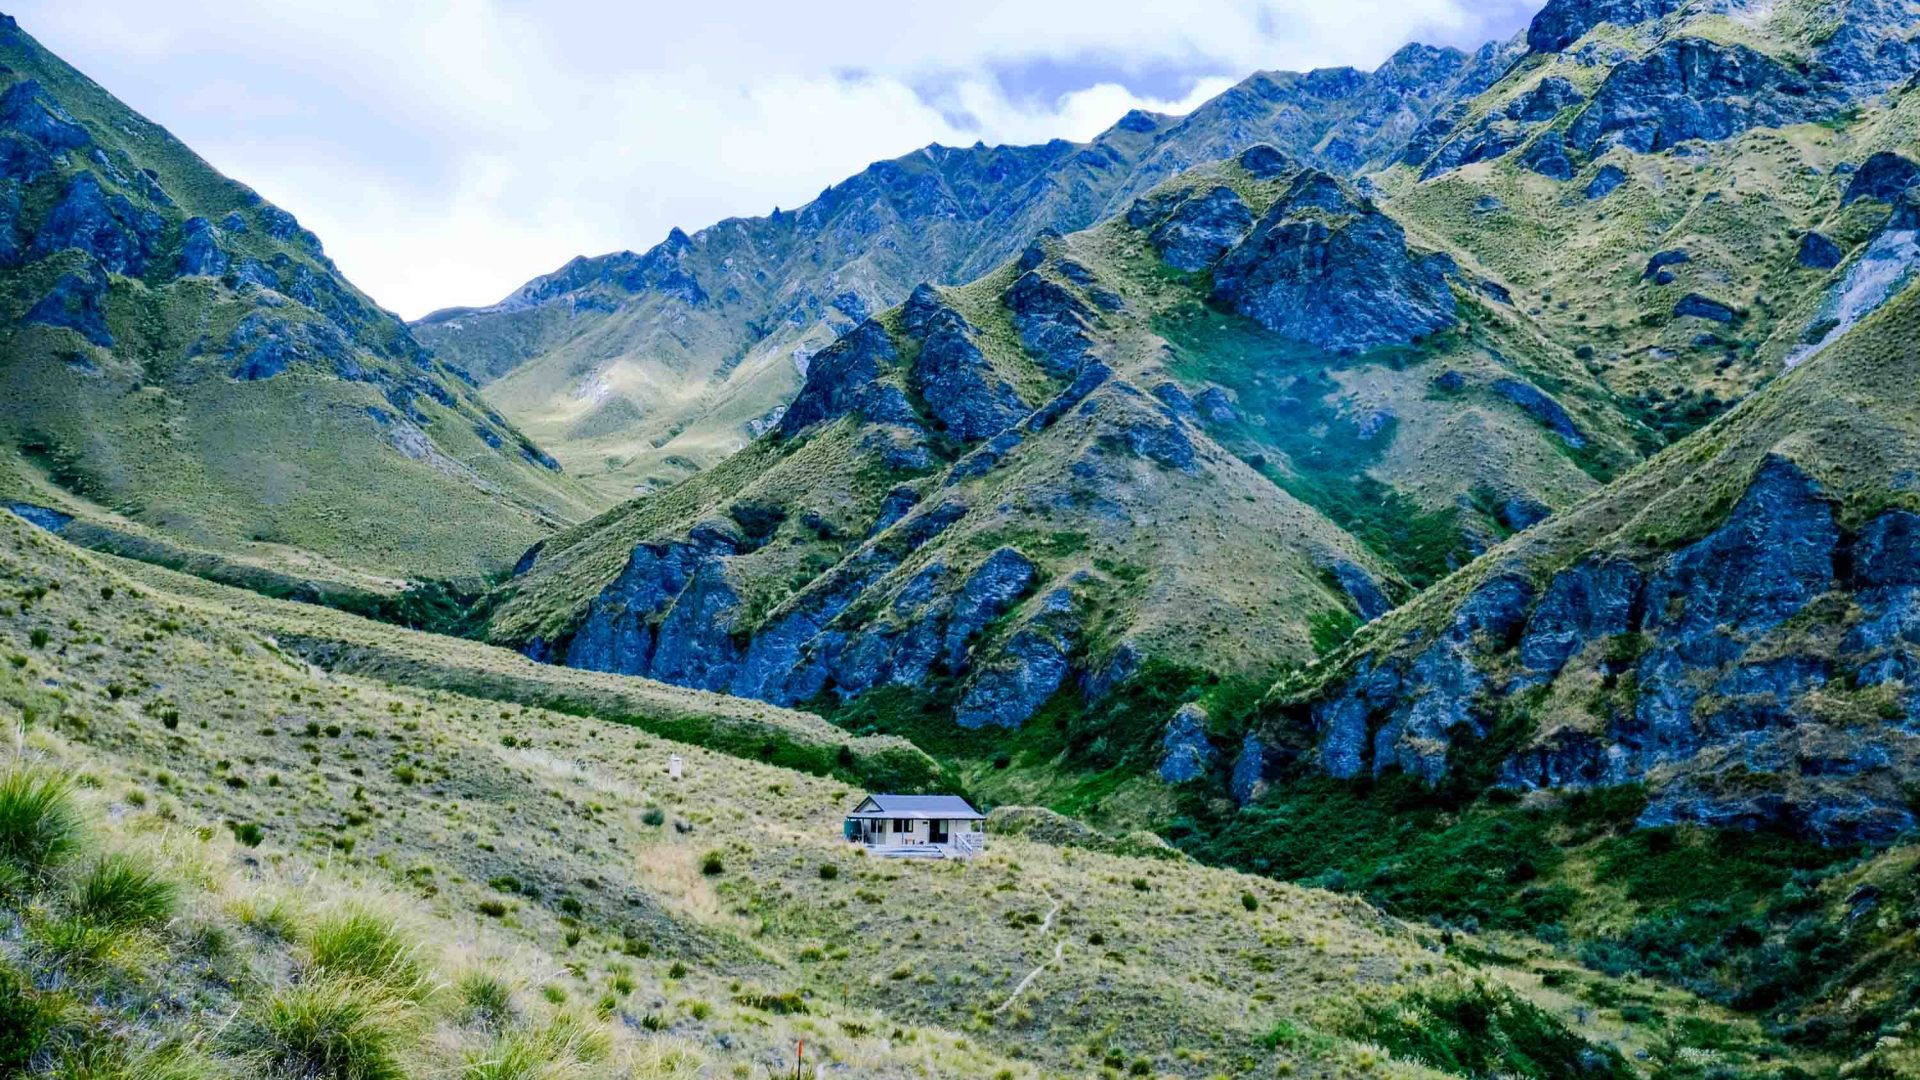 A back country hut surrounded by green mountains.